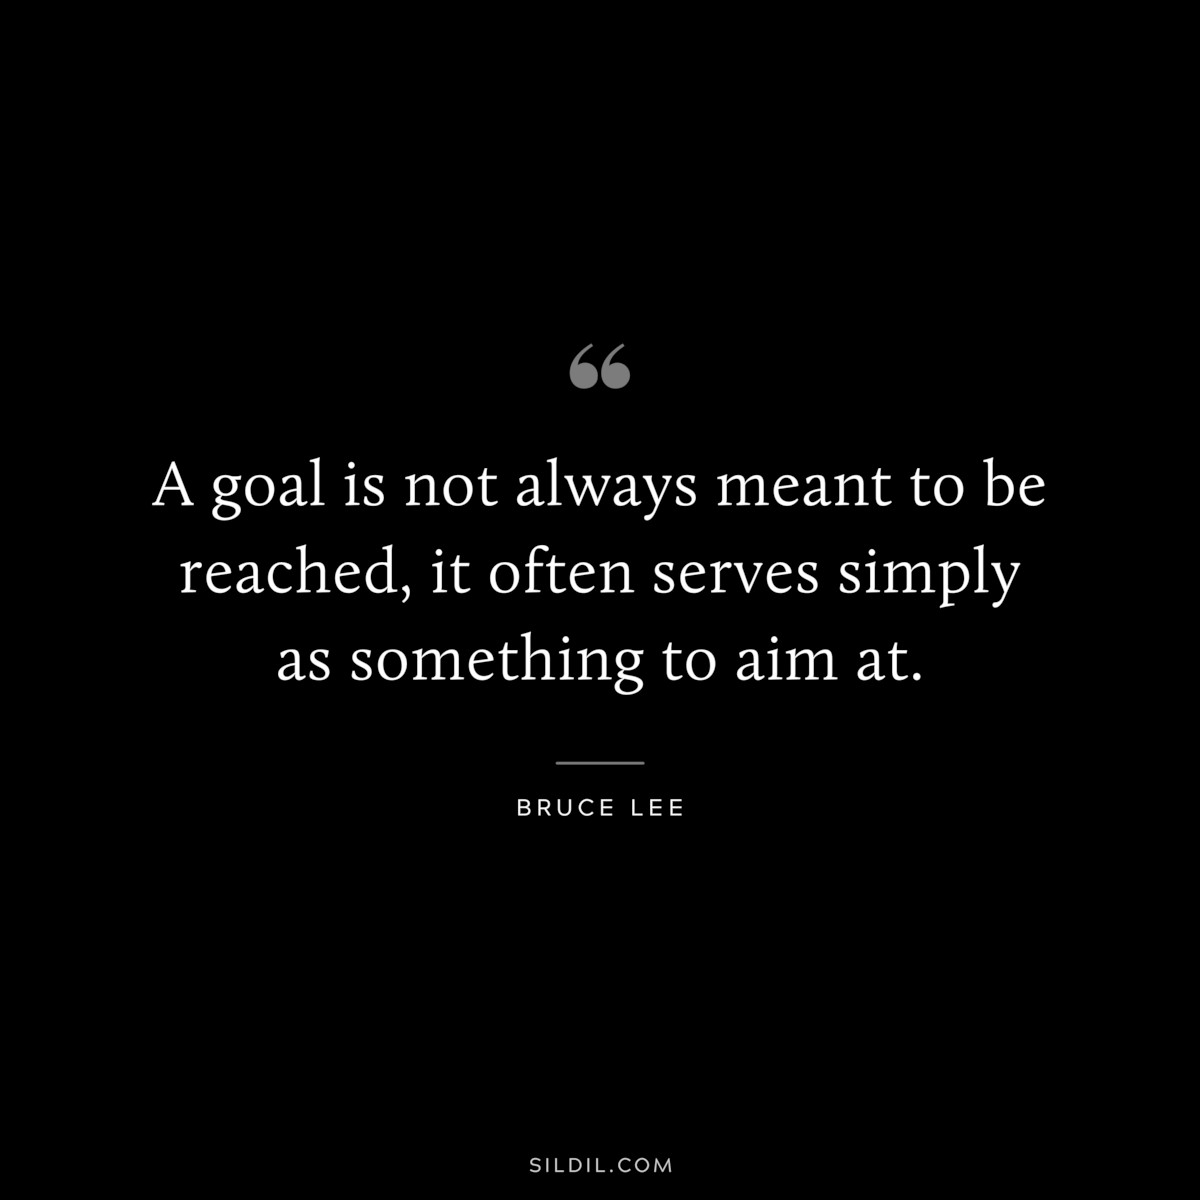 A goal is not always meant to be reached, it often serves simply as something to aim at. ― Bruce Lee